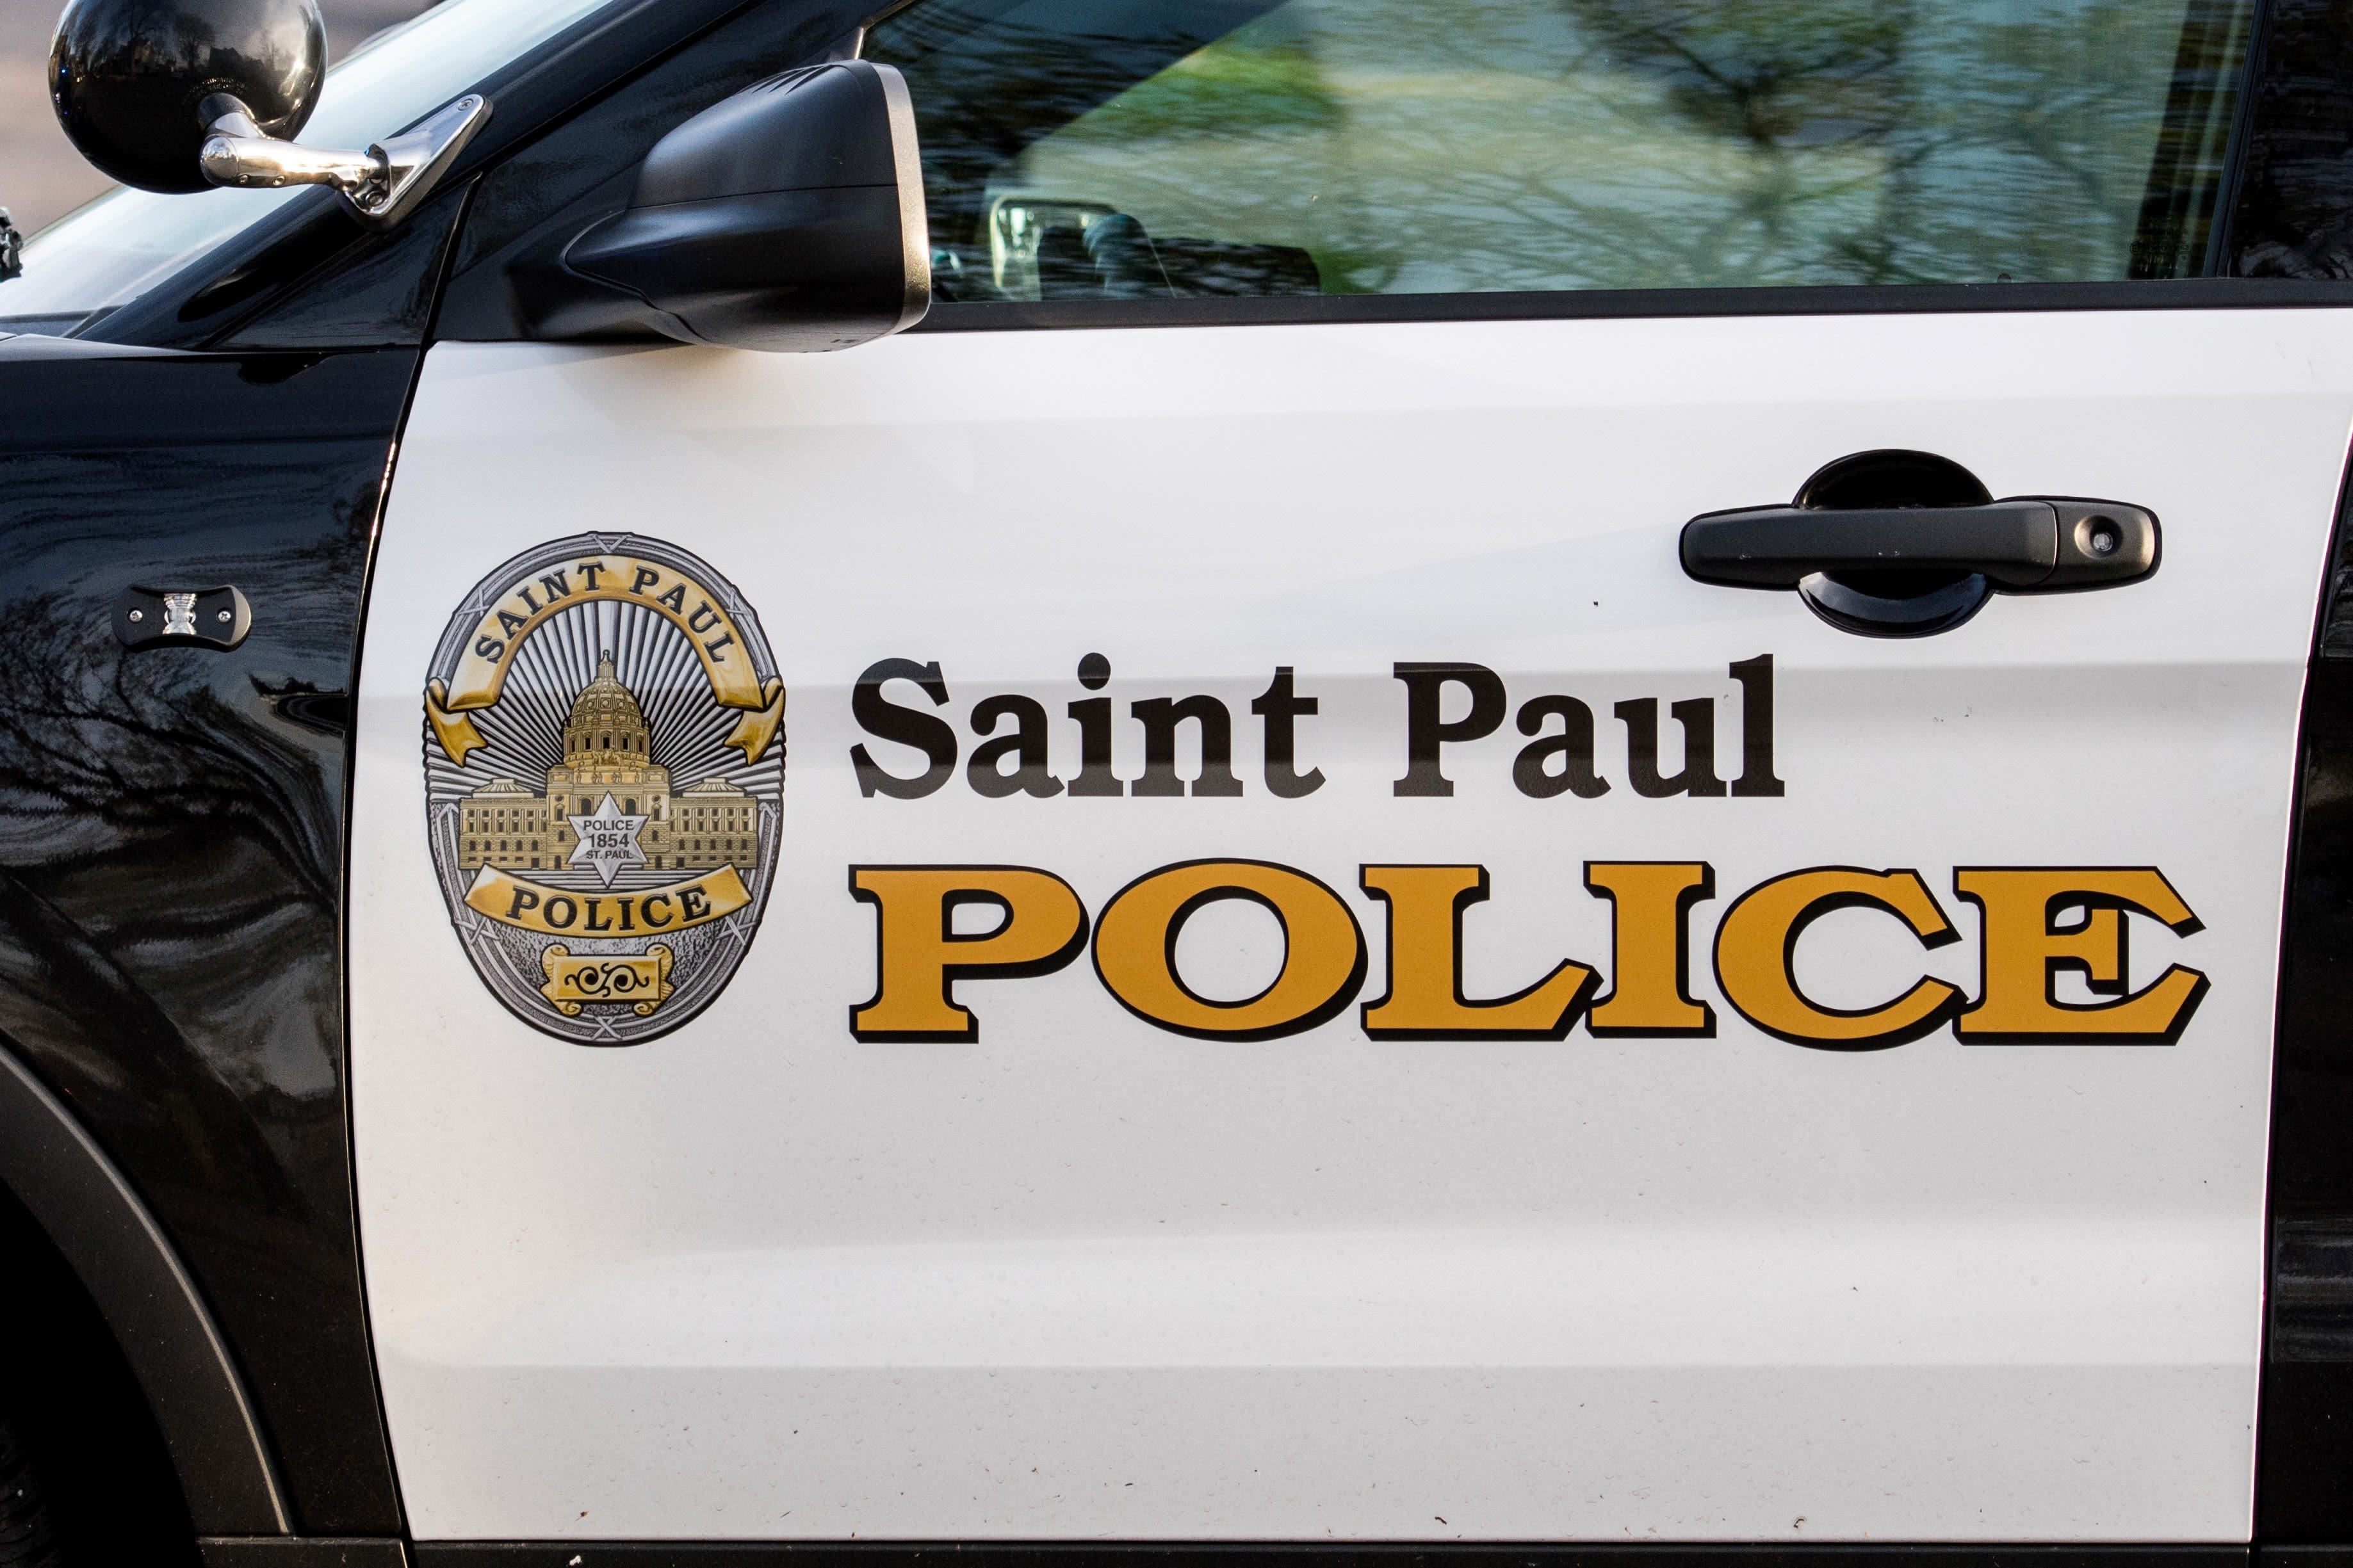 Man shot, wounded during carjacking attempt on St. Paul’s East Side